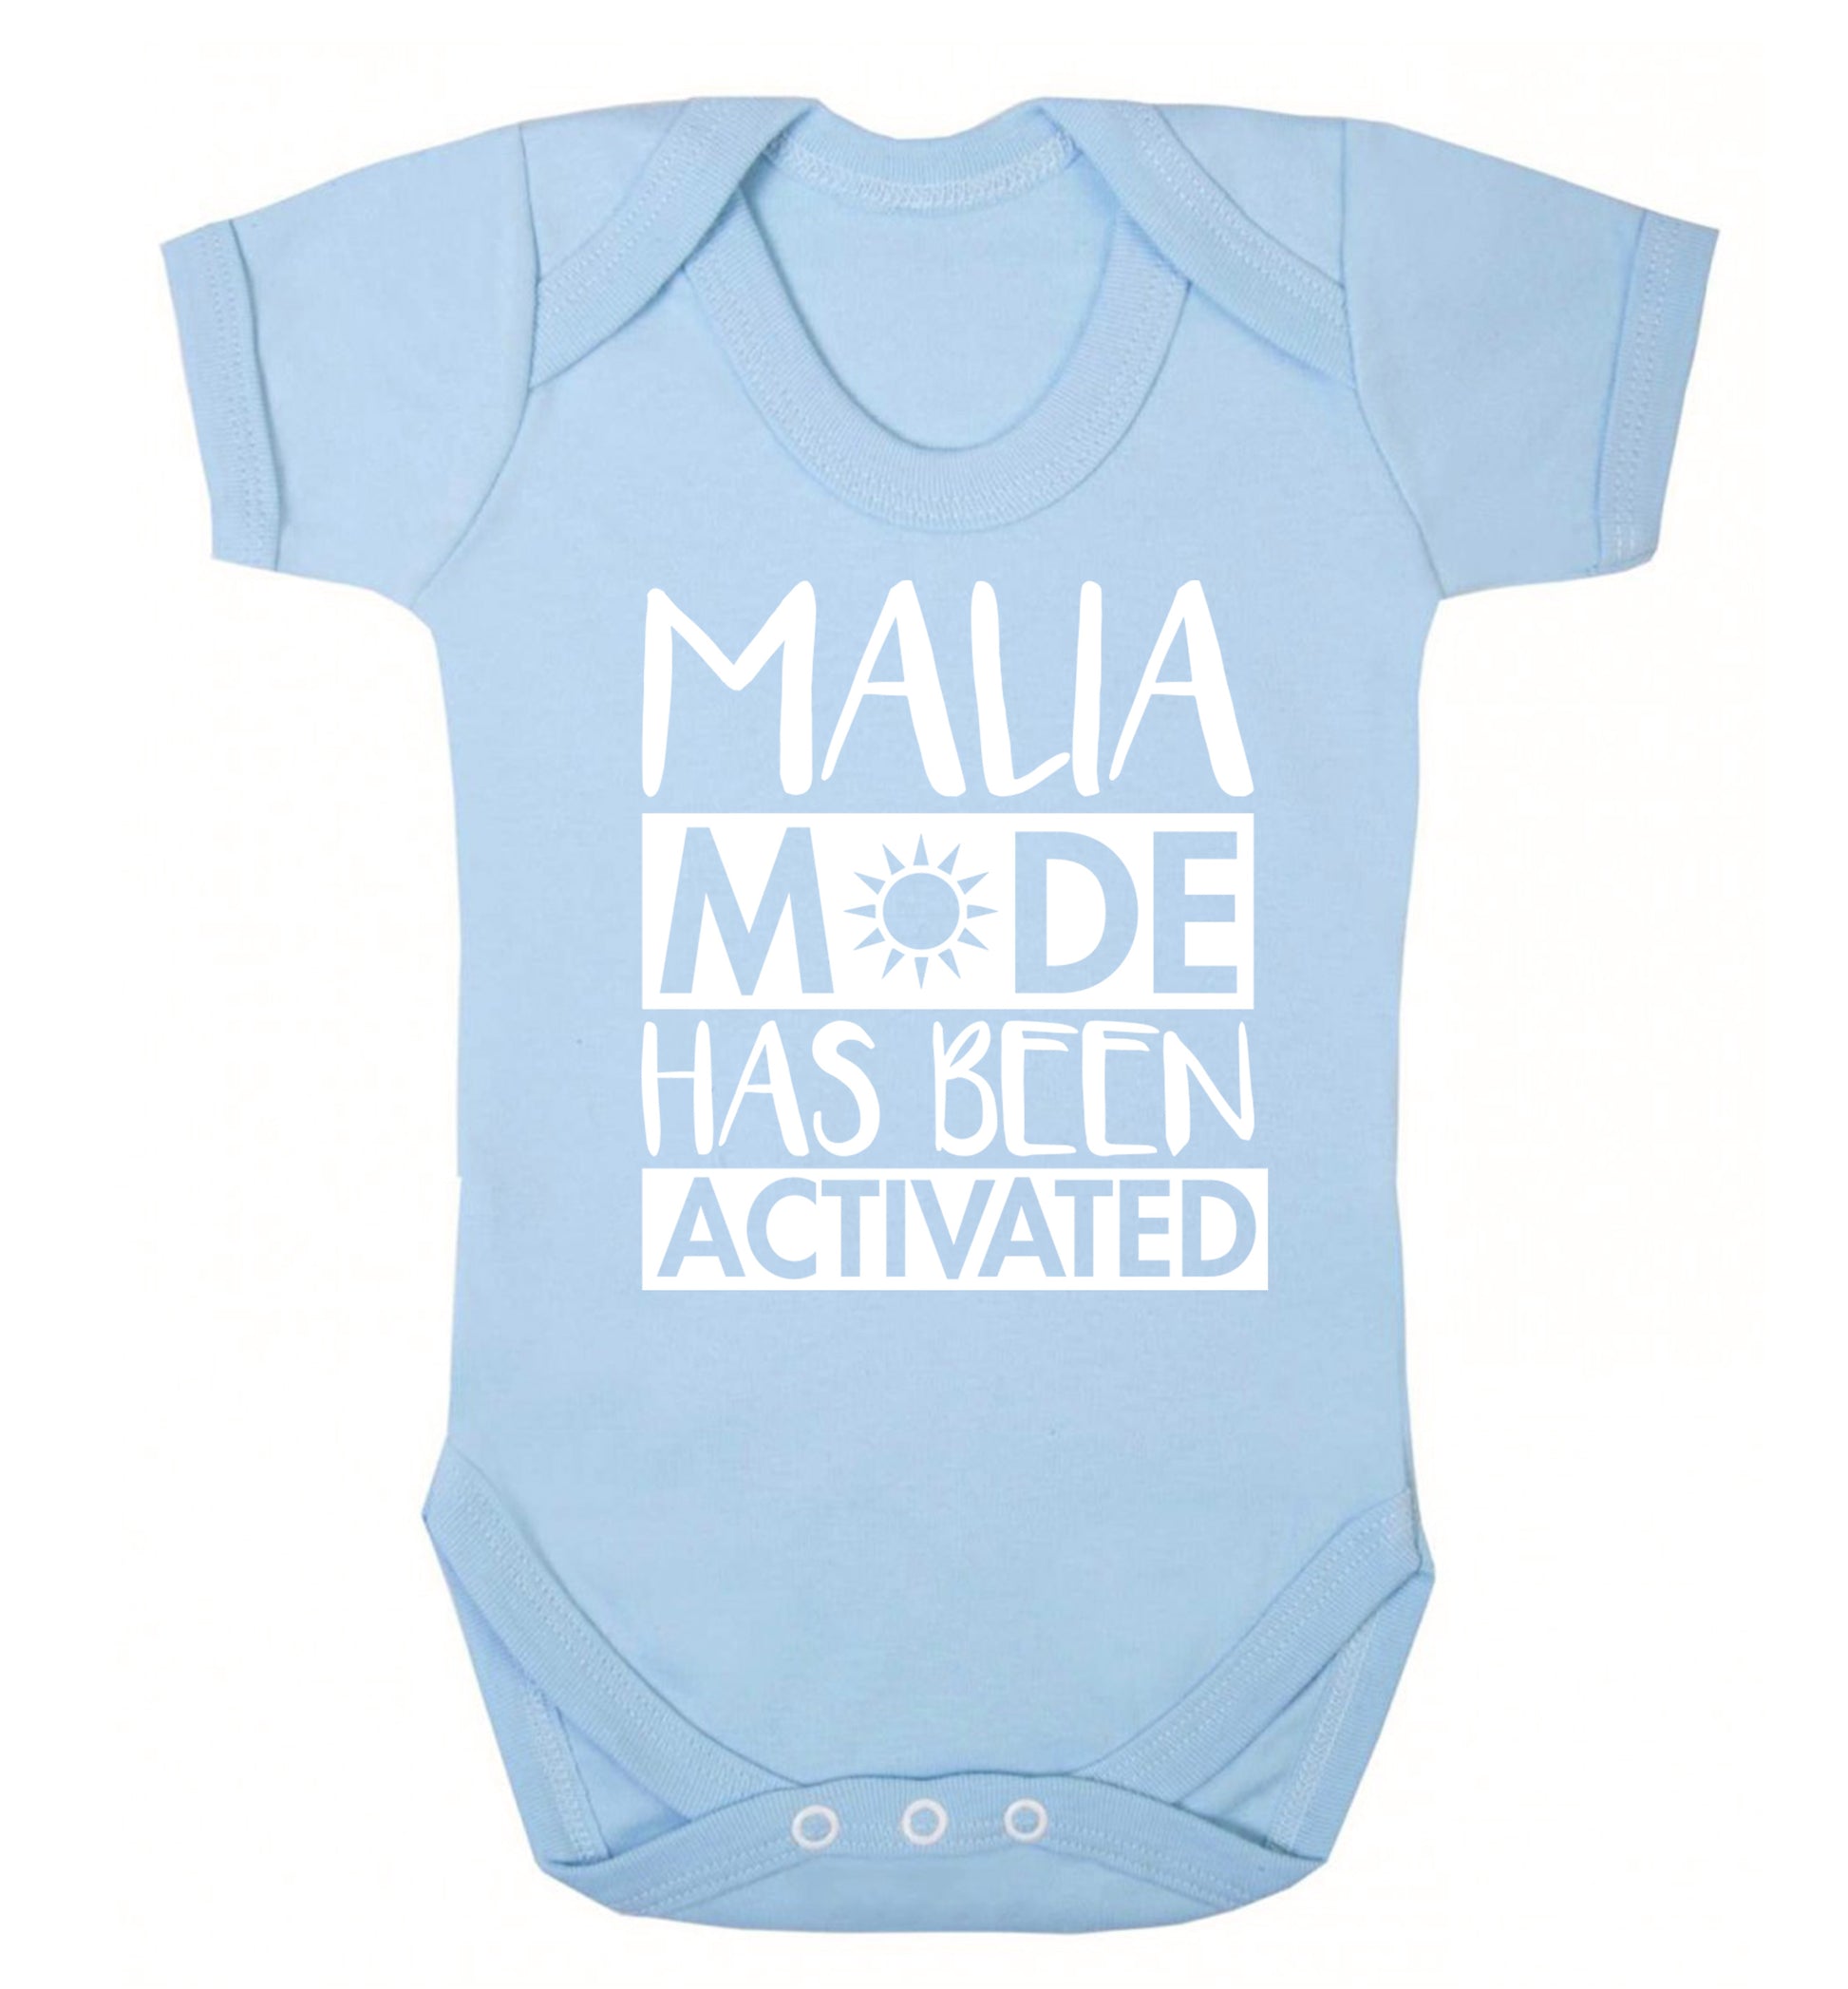 Malia mode has been activated Baby Vest pale blue 18-24 months